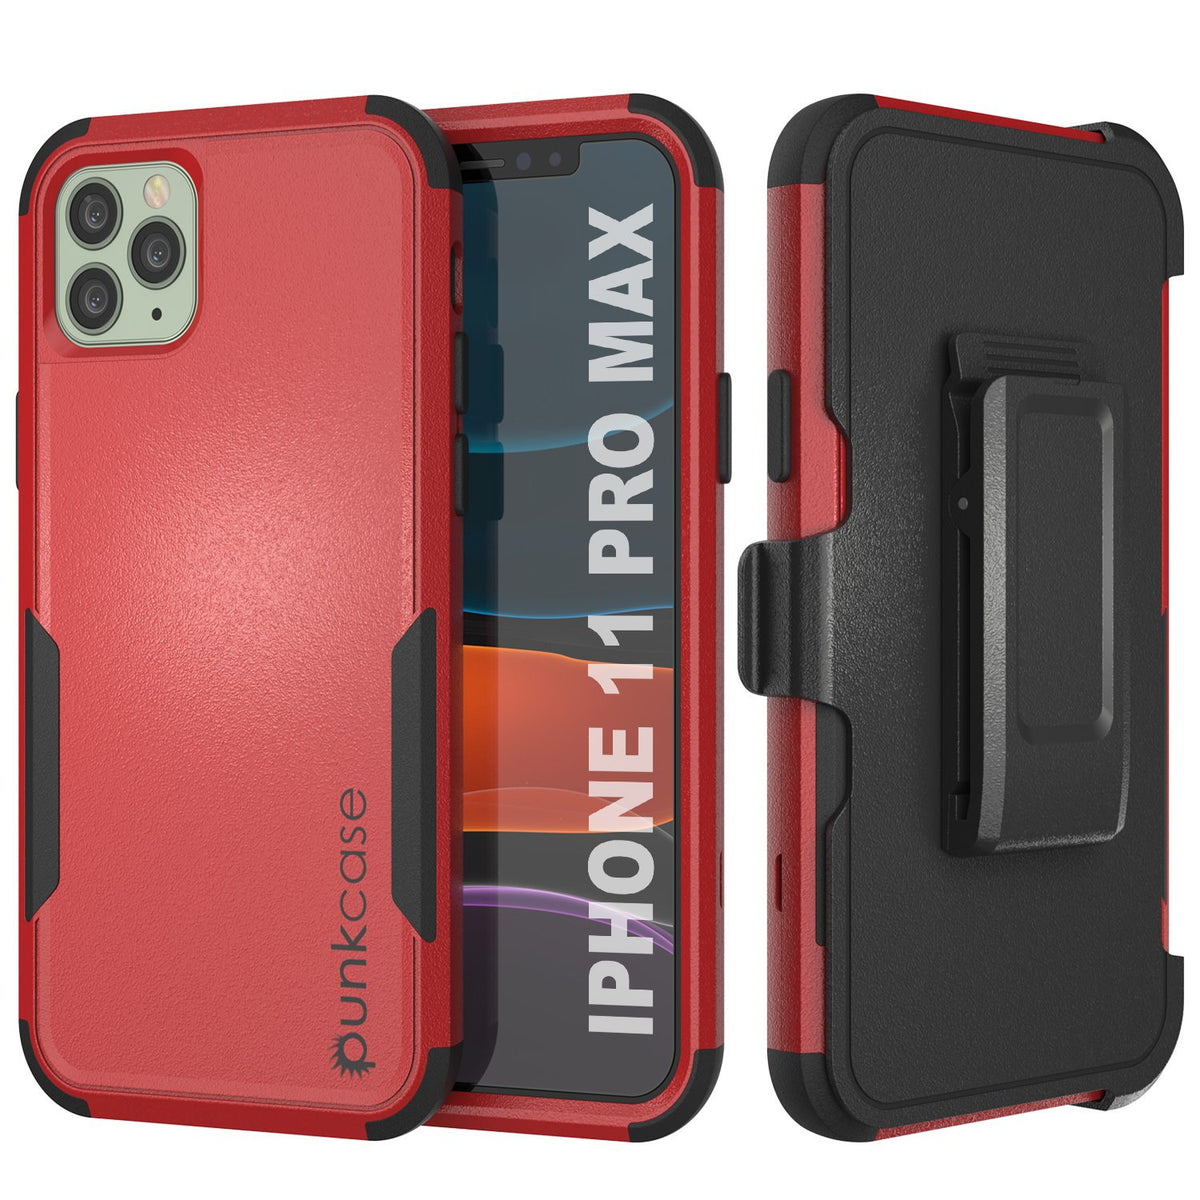 iPhone 11, 11 Pro, 11 Pro Max Case With Holster — GHOSTEK